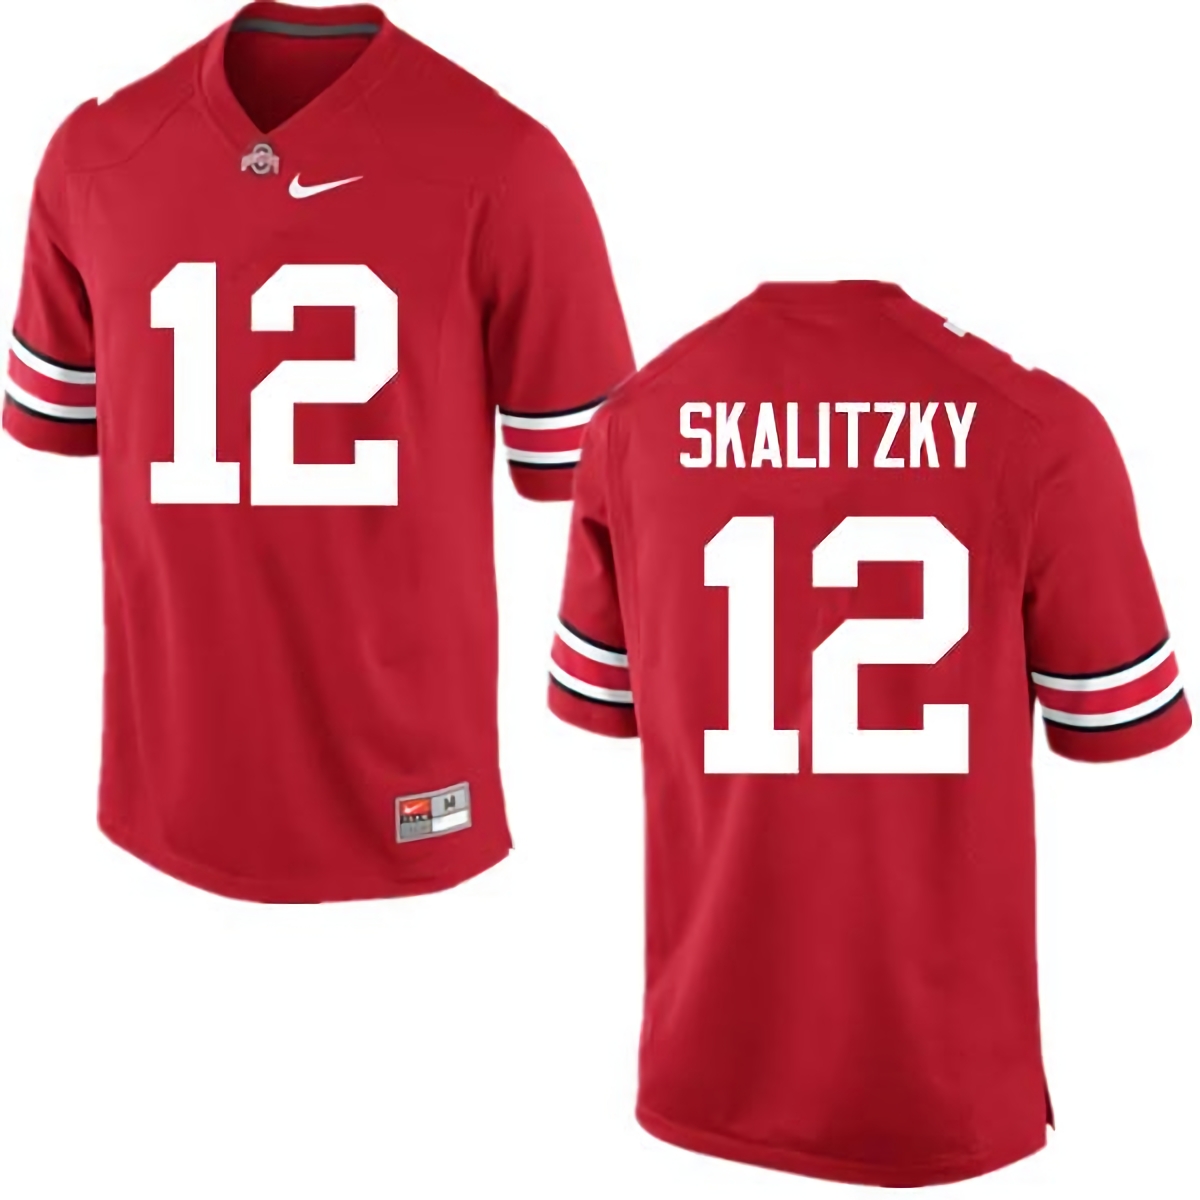 Brendan Skalitzky Ohio State Buckeyes Men's NCAA #12 Nike Red College Stitched Football Jersey QJB4056CO